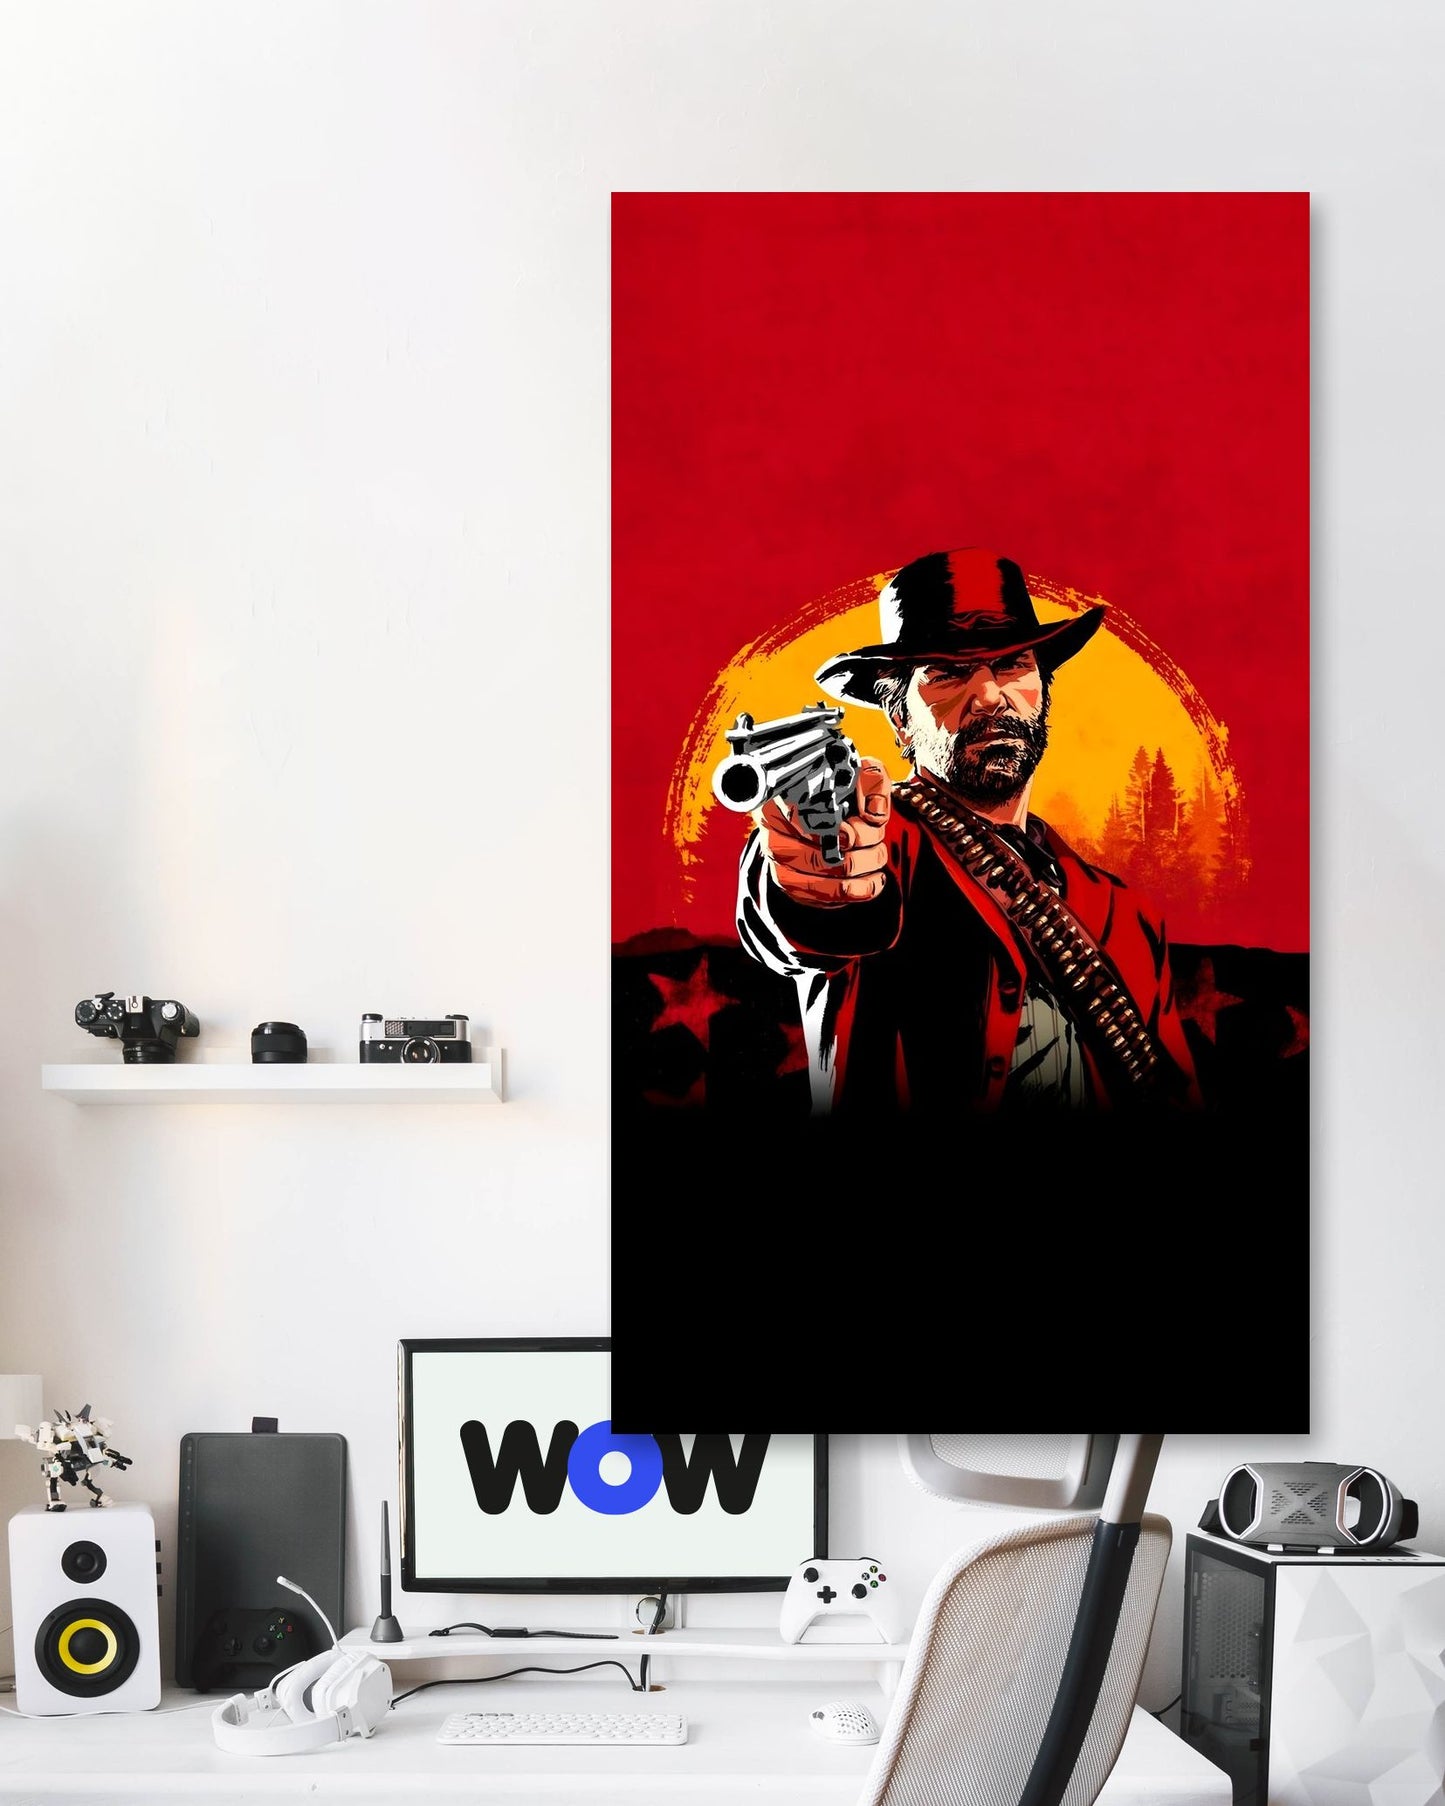 Red Dead Redemption 2 Game - @busosoku